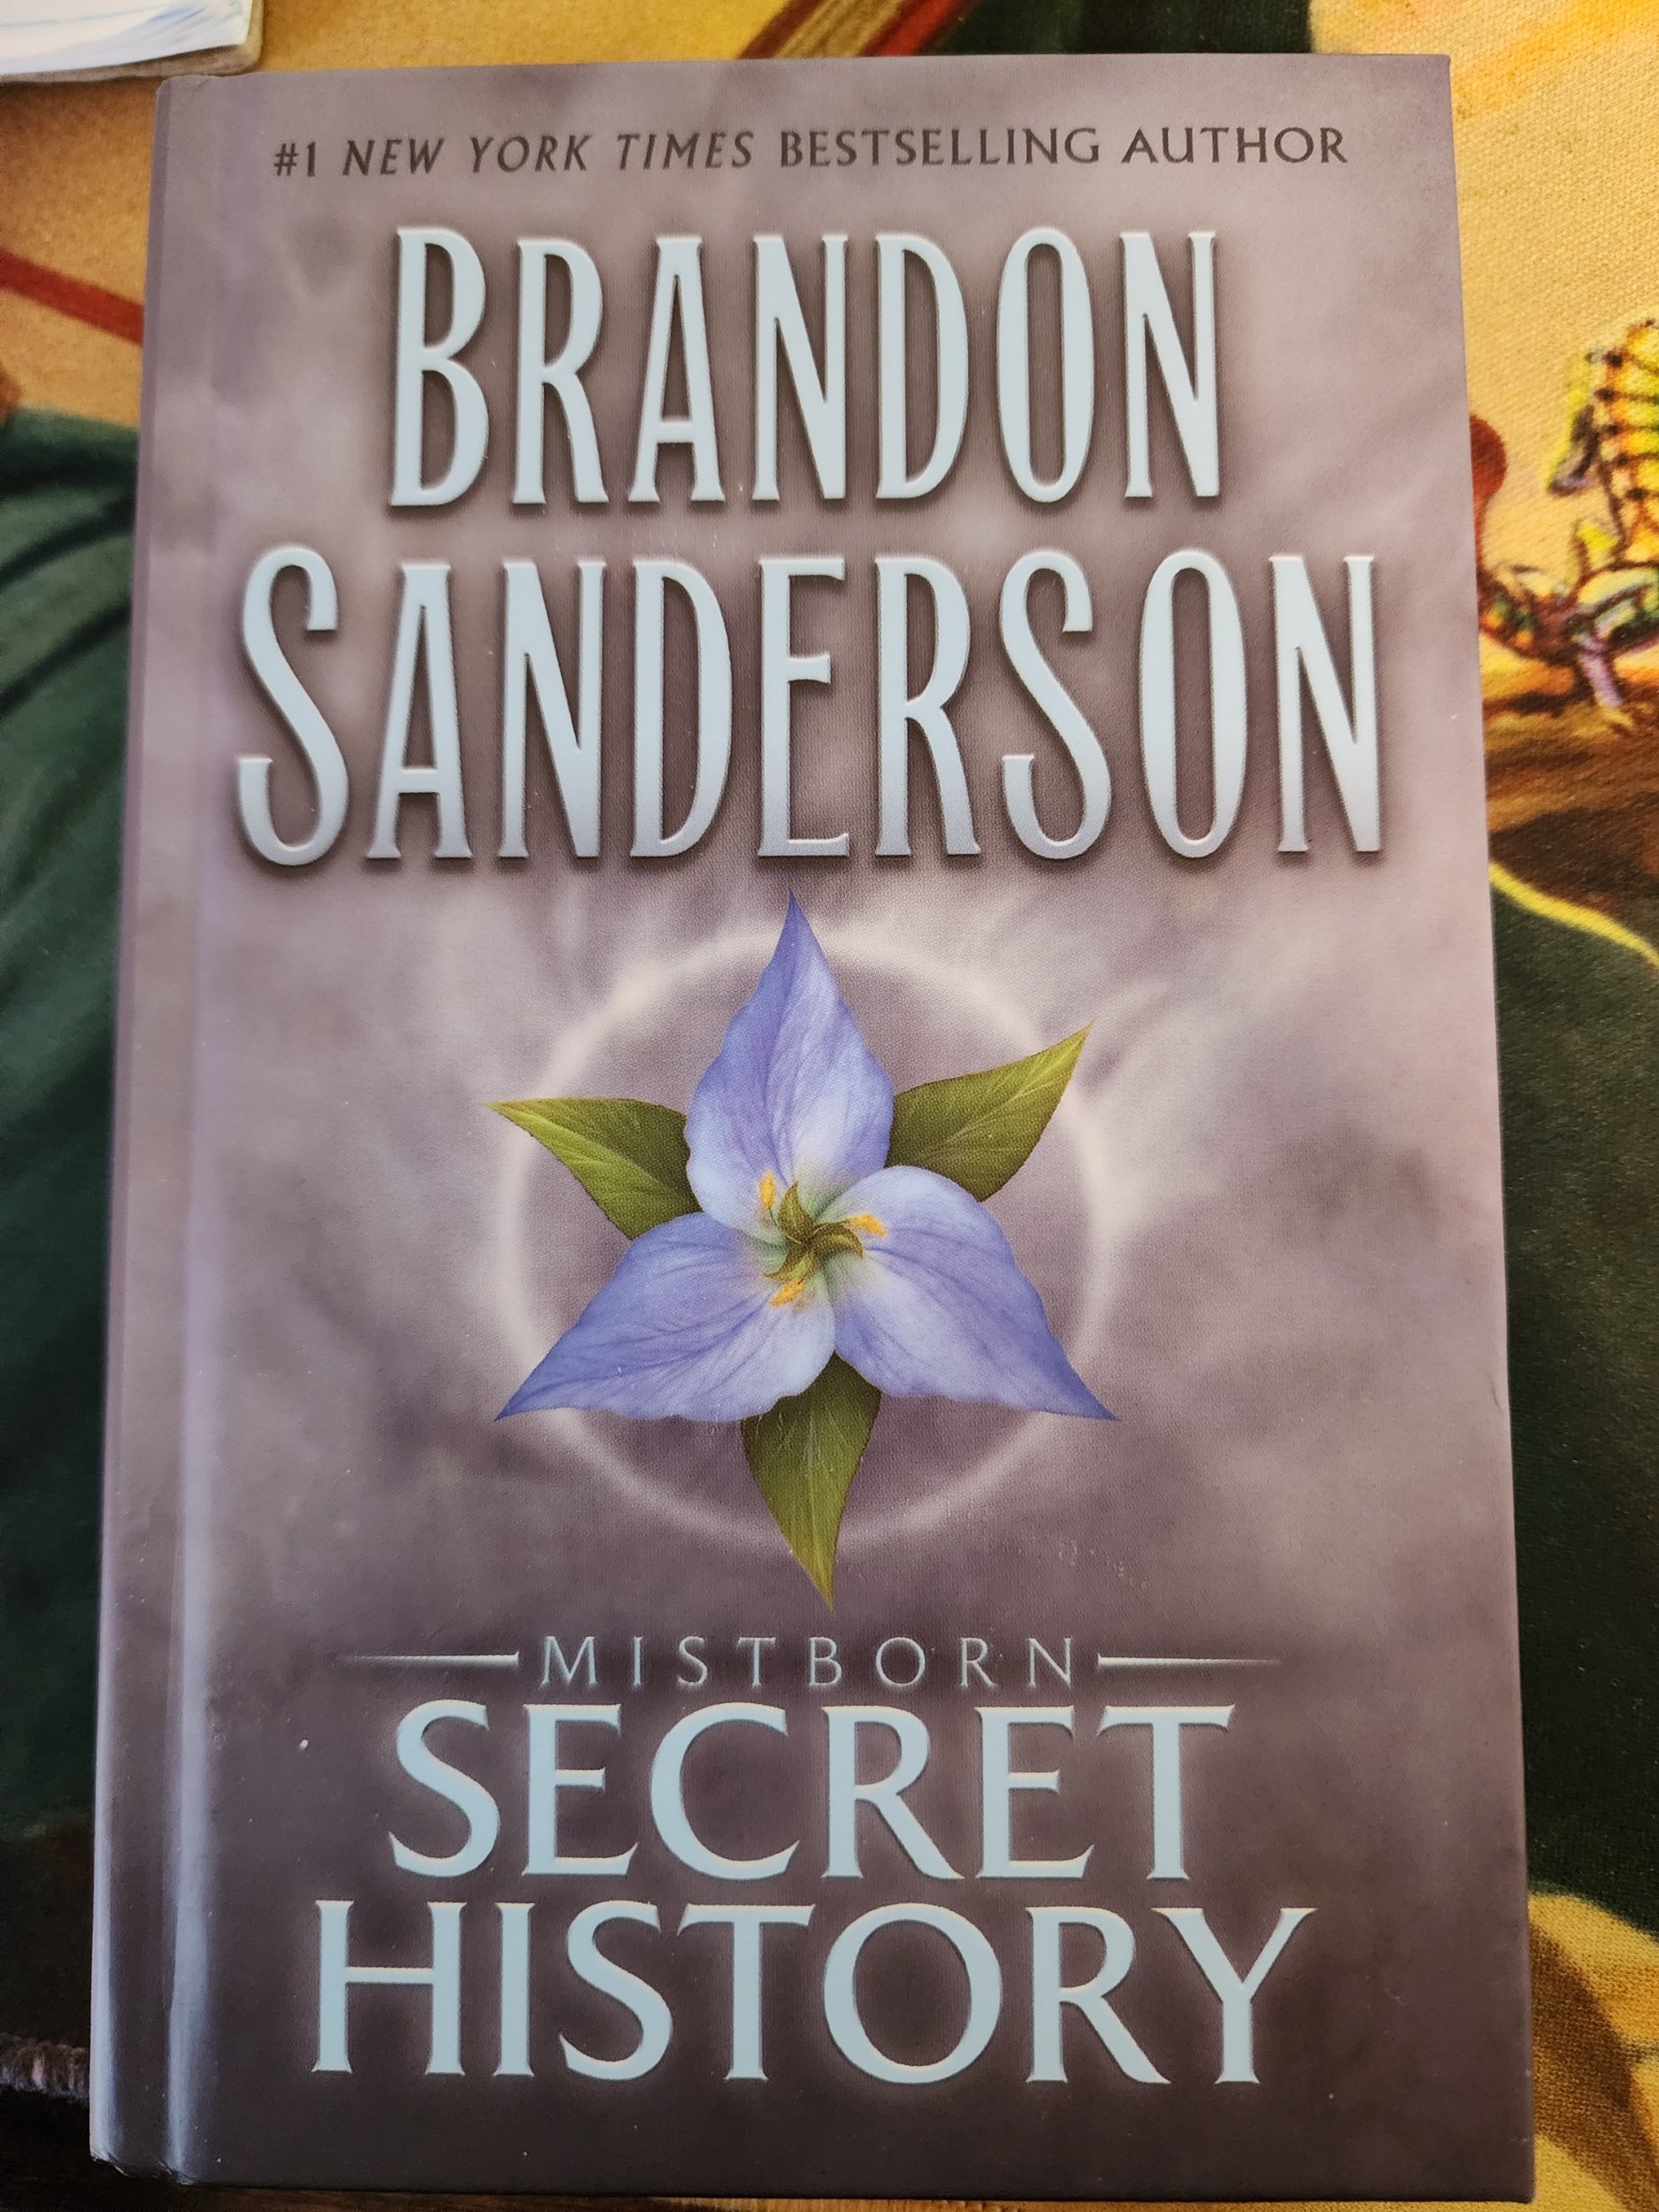 What You Should Know About 'Mistborn: Secret History' by Brandon